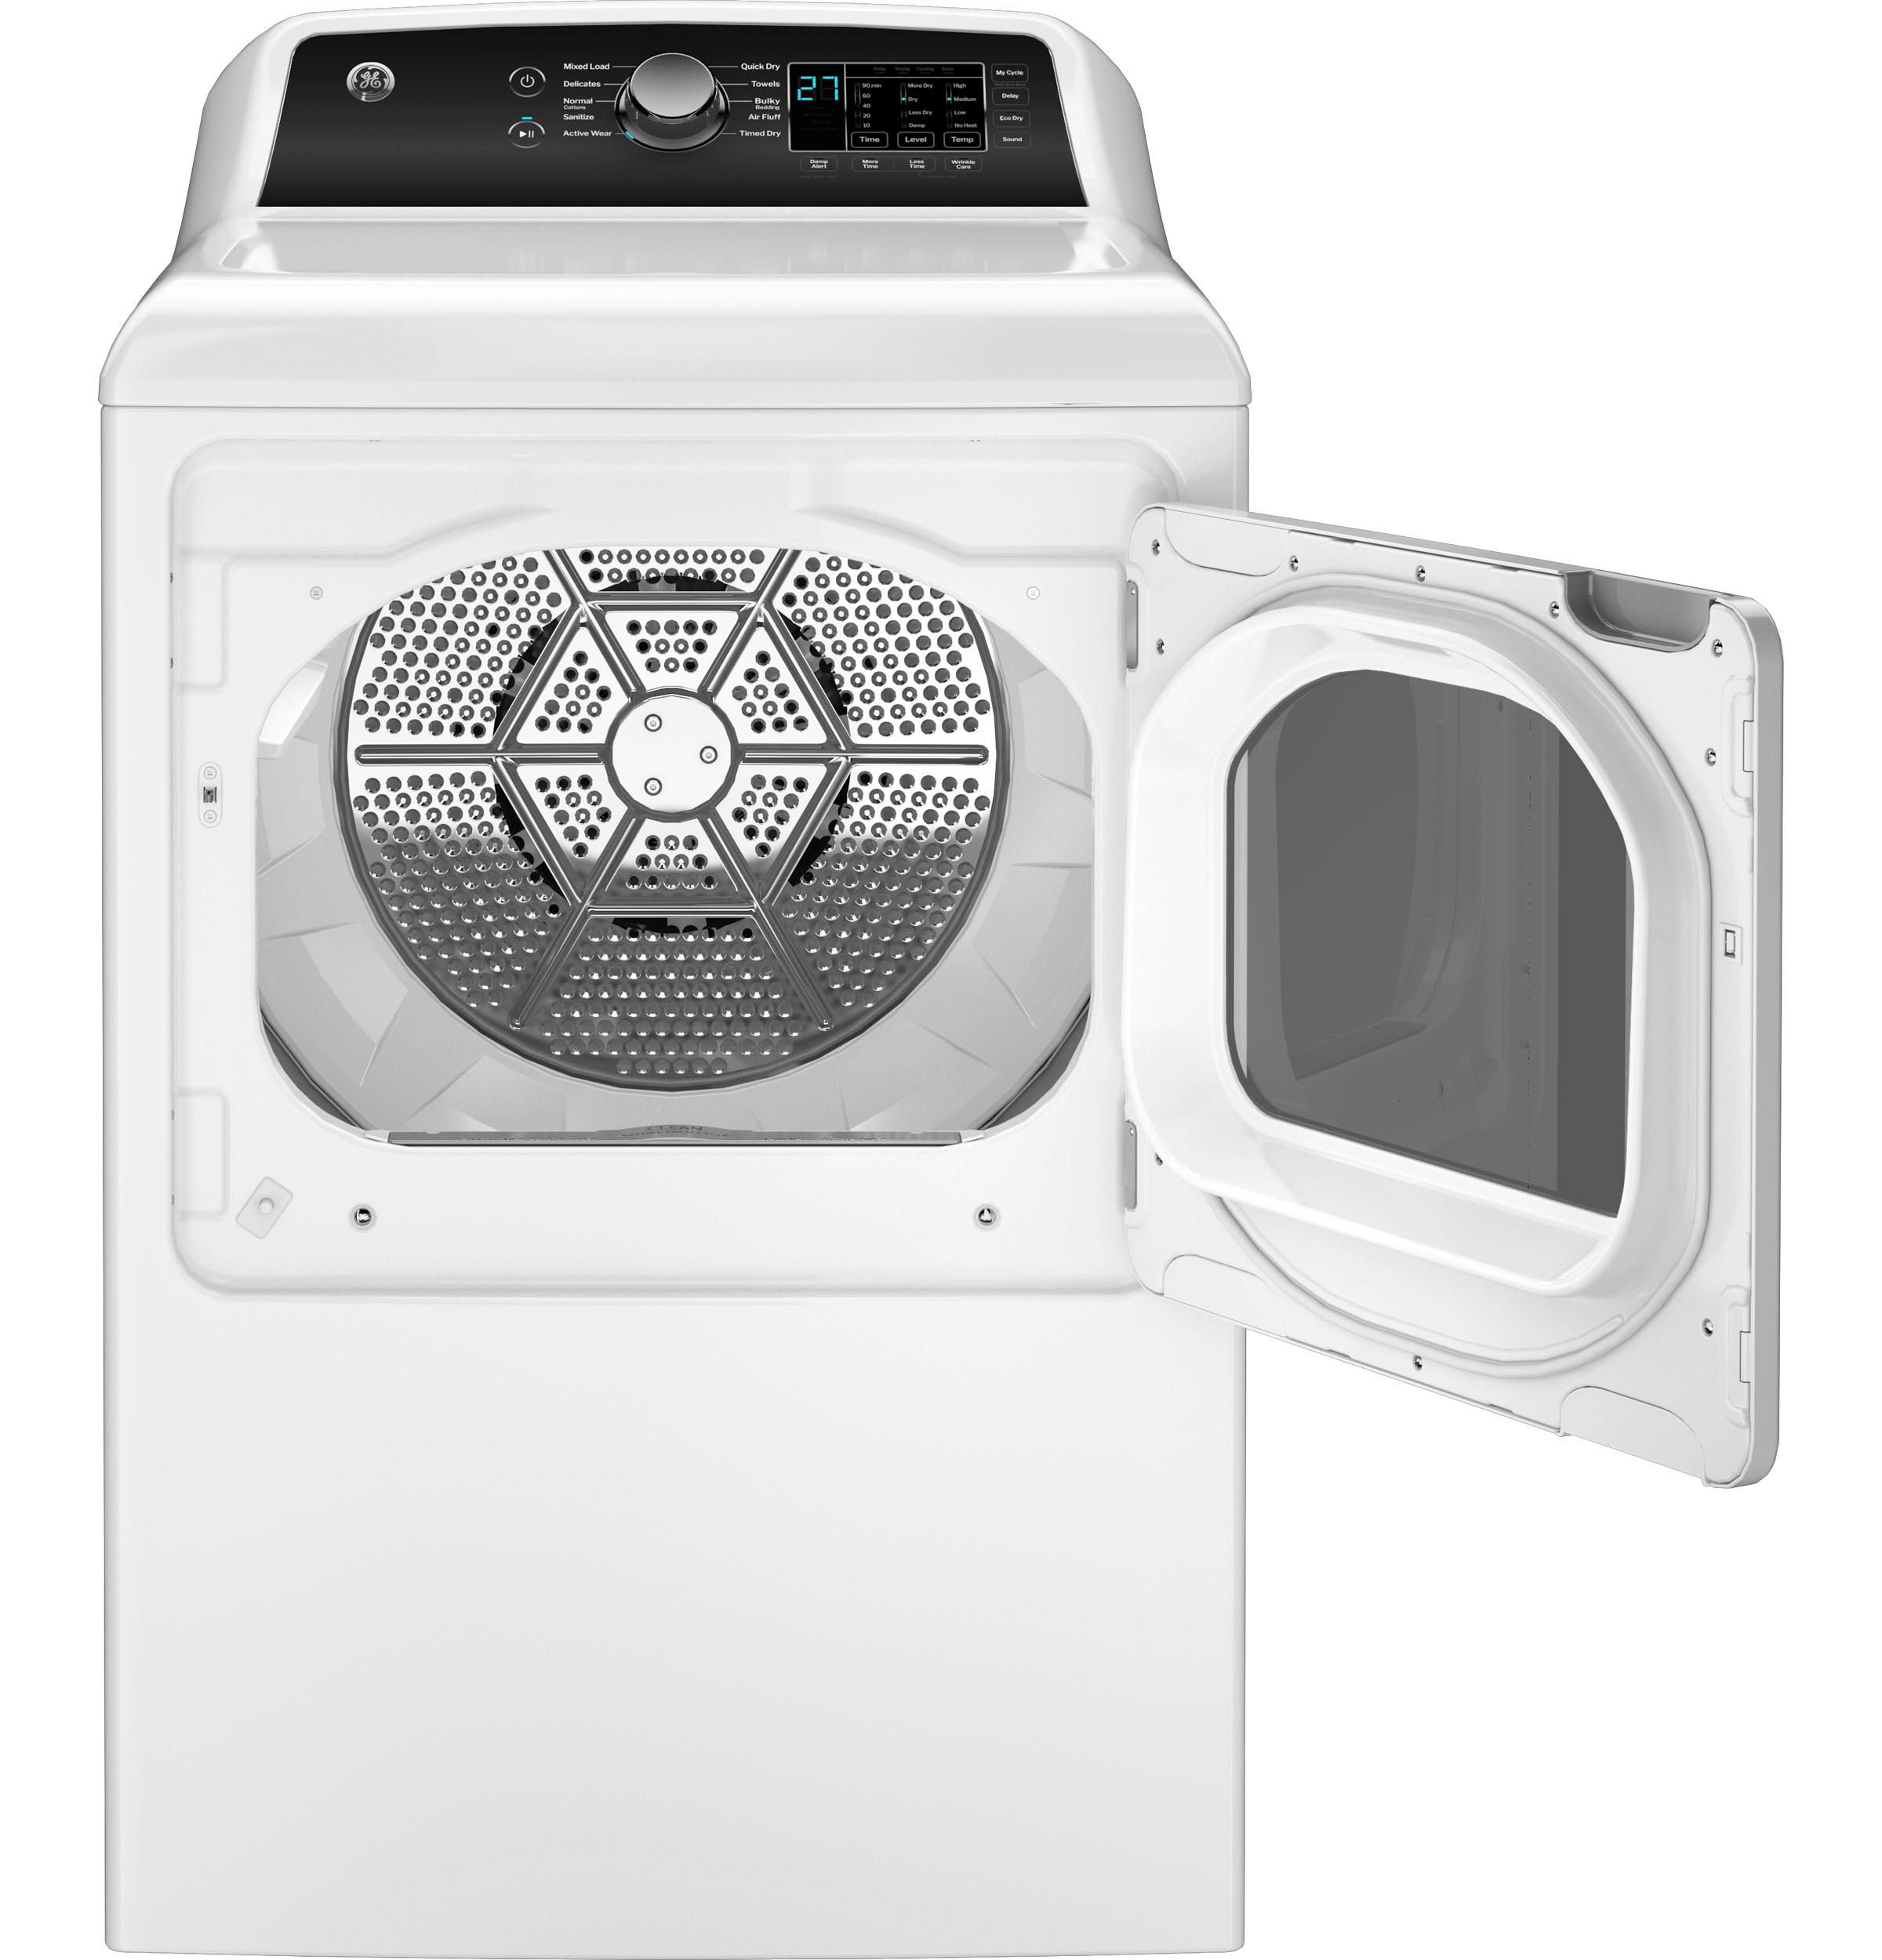 GTS18HGNRWW in White by GE Appliances in Schenectady, NY - GE